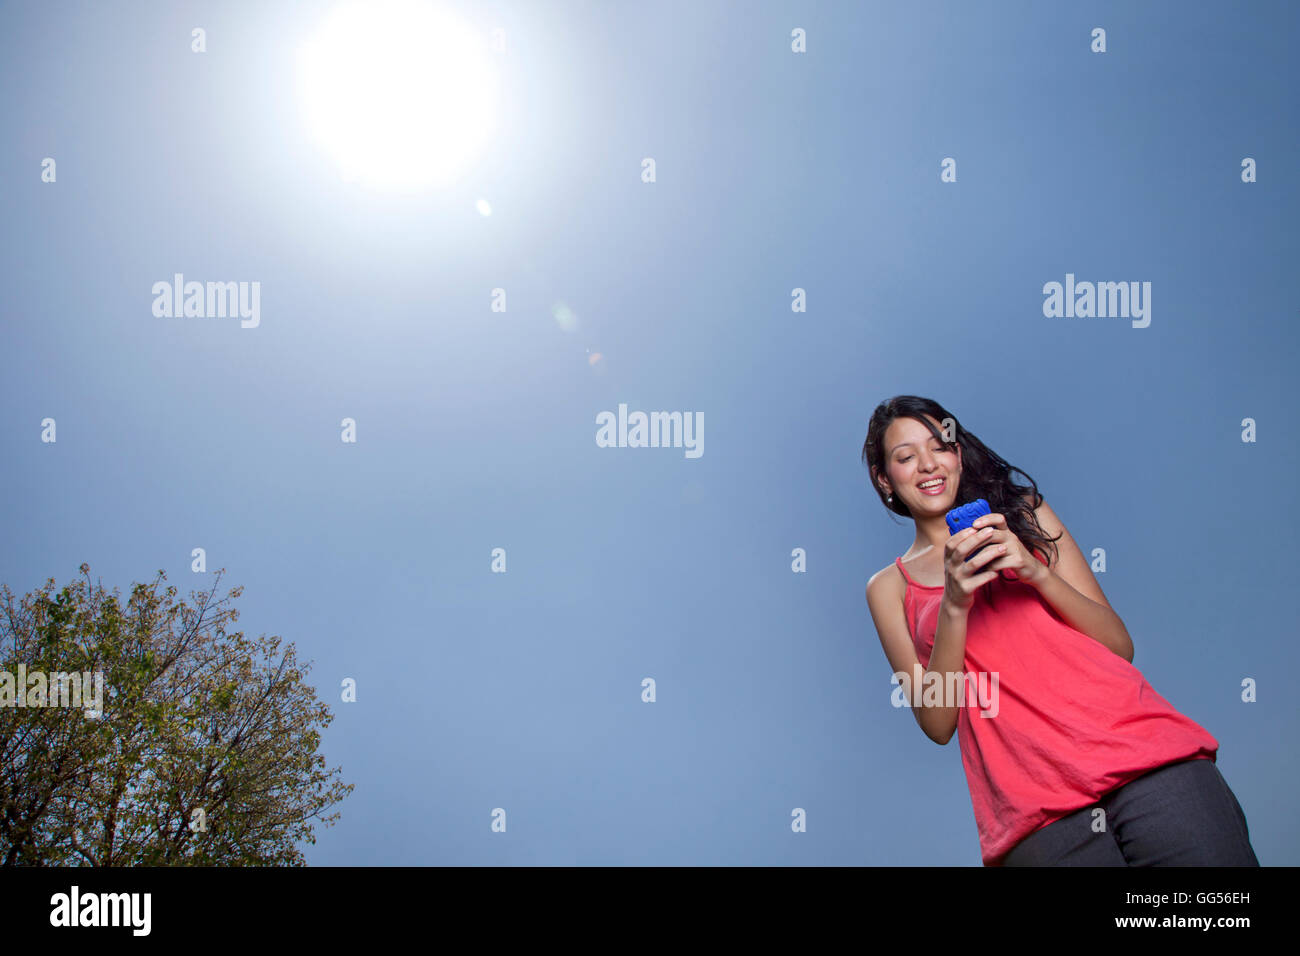 Low angle view of woman text messaging on a sunny day Stock Photo